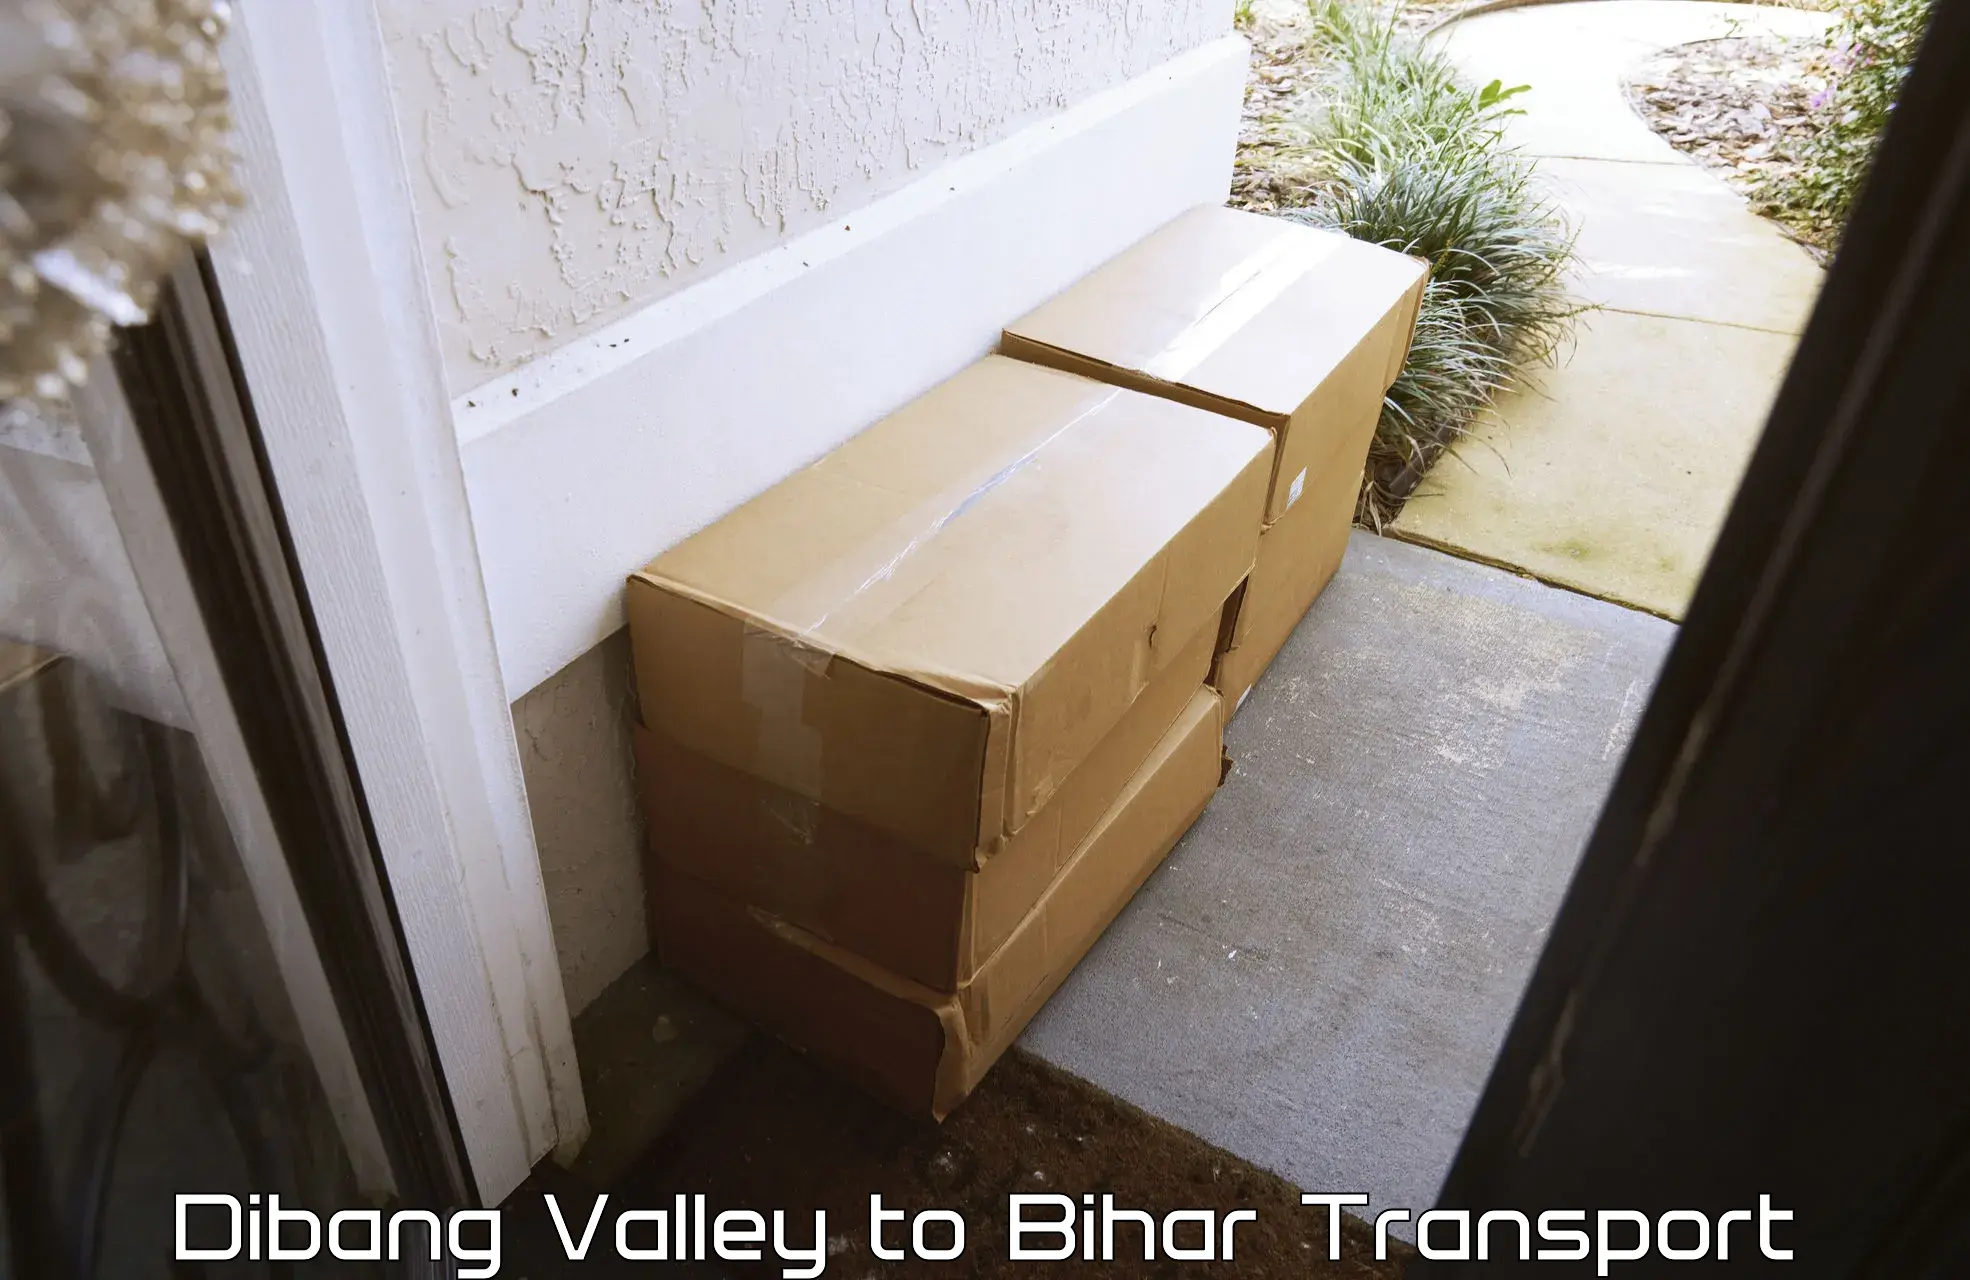 Land transport services in Dibang Valley to Bhojpur